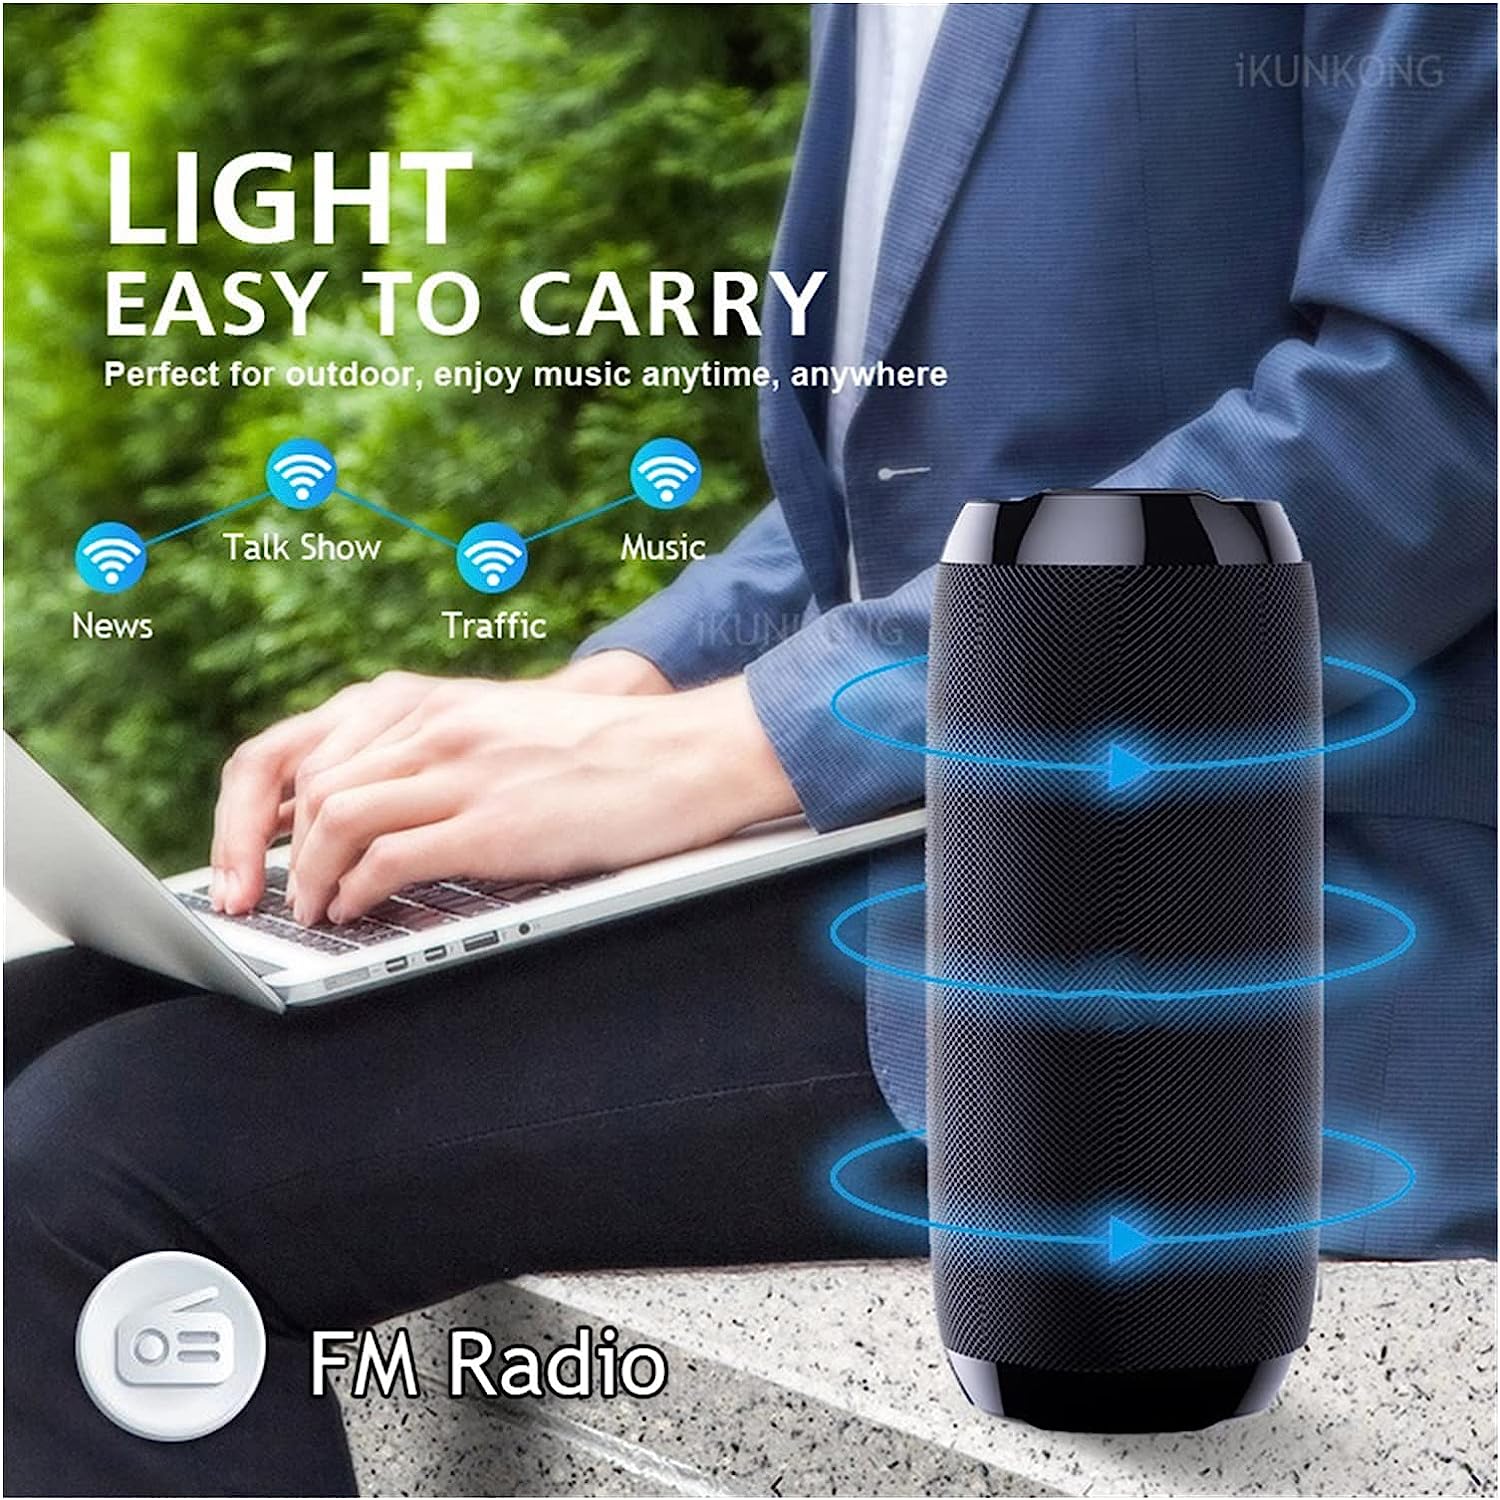 Speakers-Portable-Wireless-Bluetooth-Speaker-with-Waterproof-Outdoor-Stereo-BassUSB-TF-FM-8